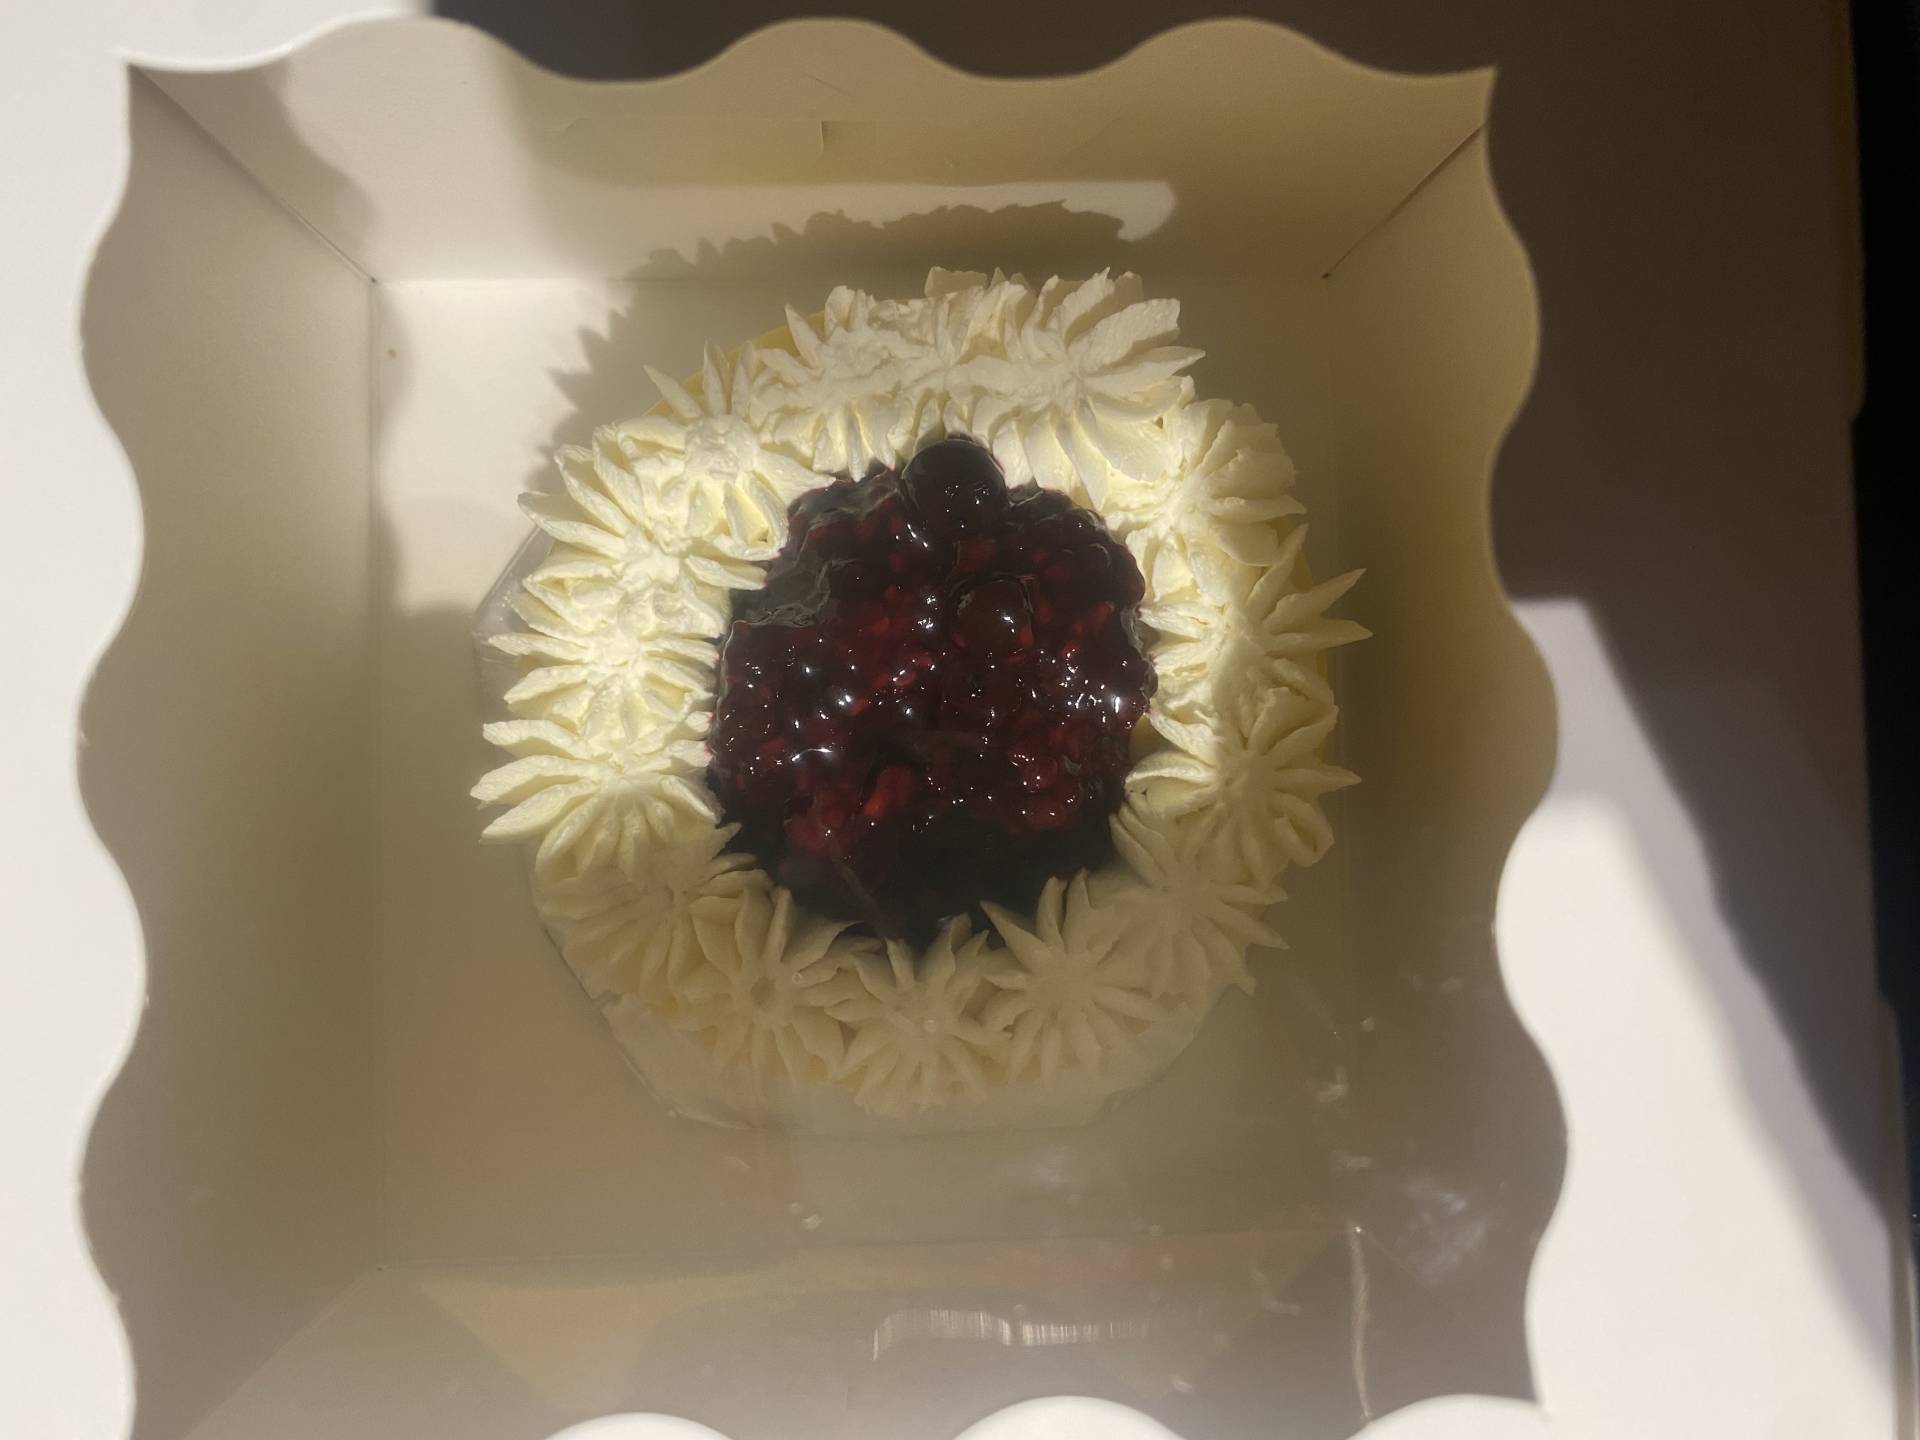 Mini Cheesecake 3 inches/Mixed Berry Compote